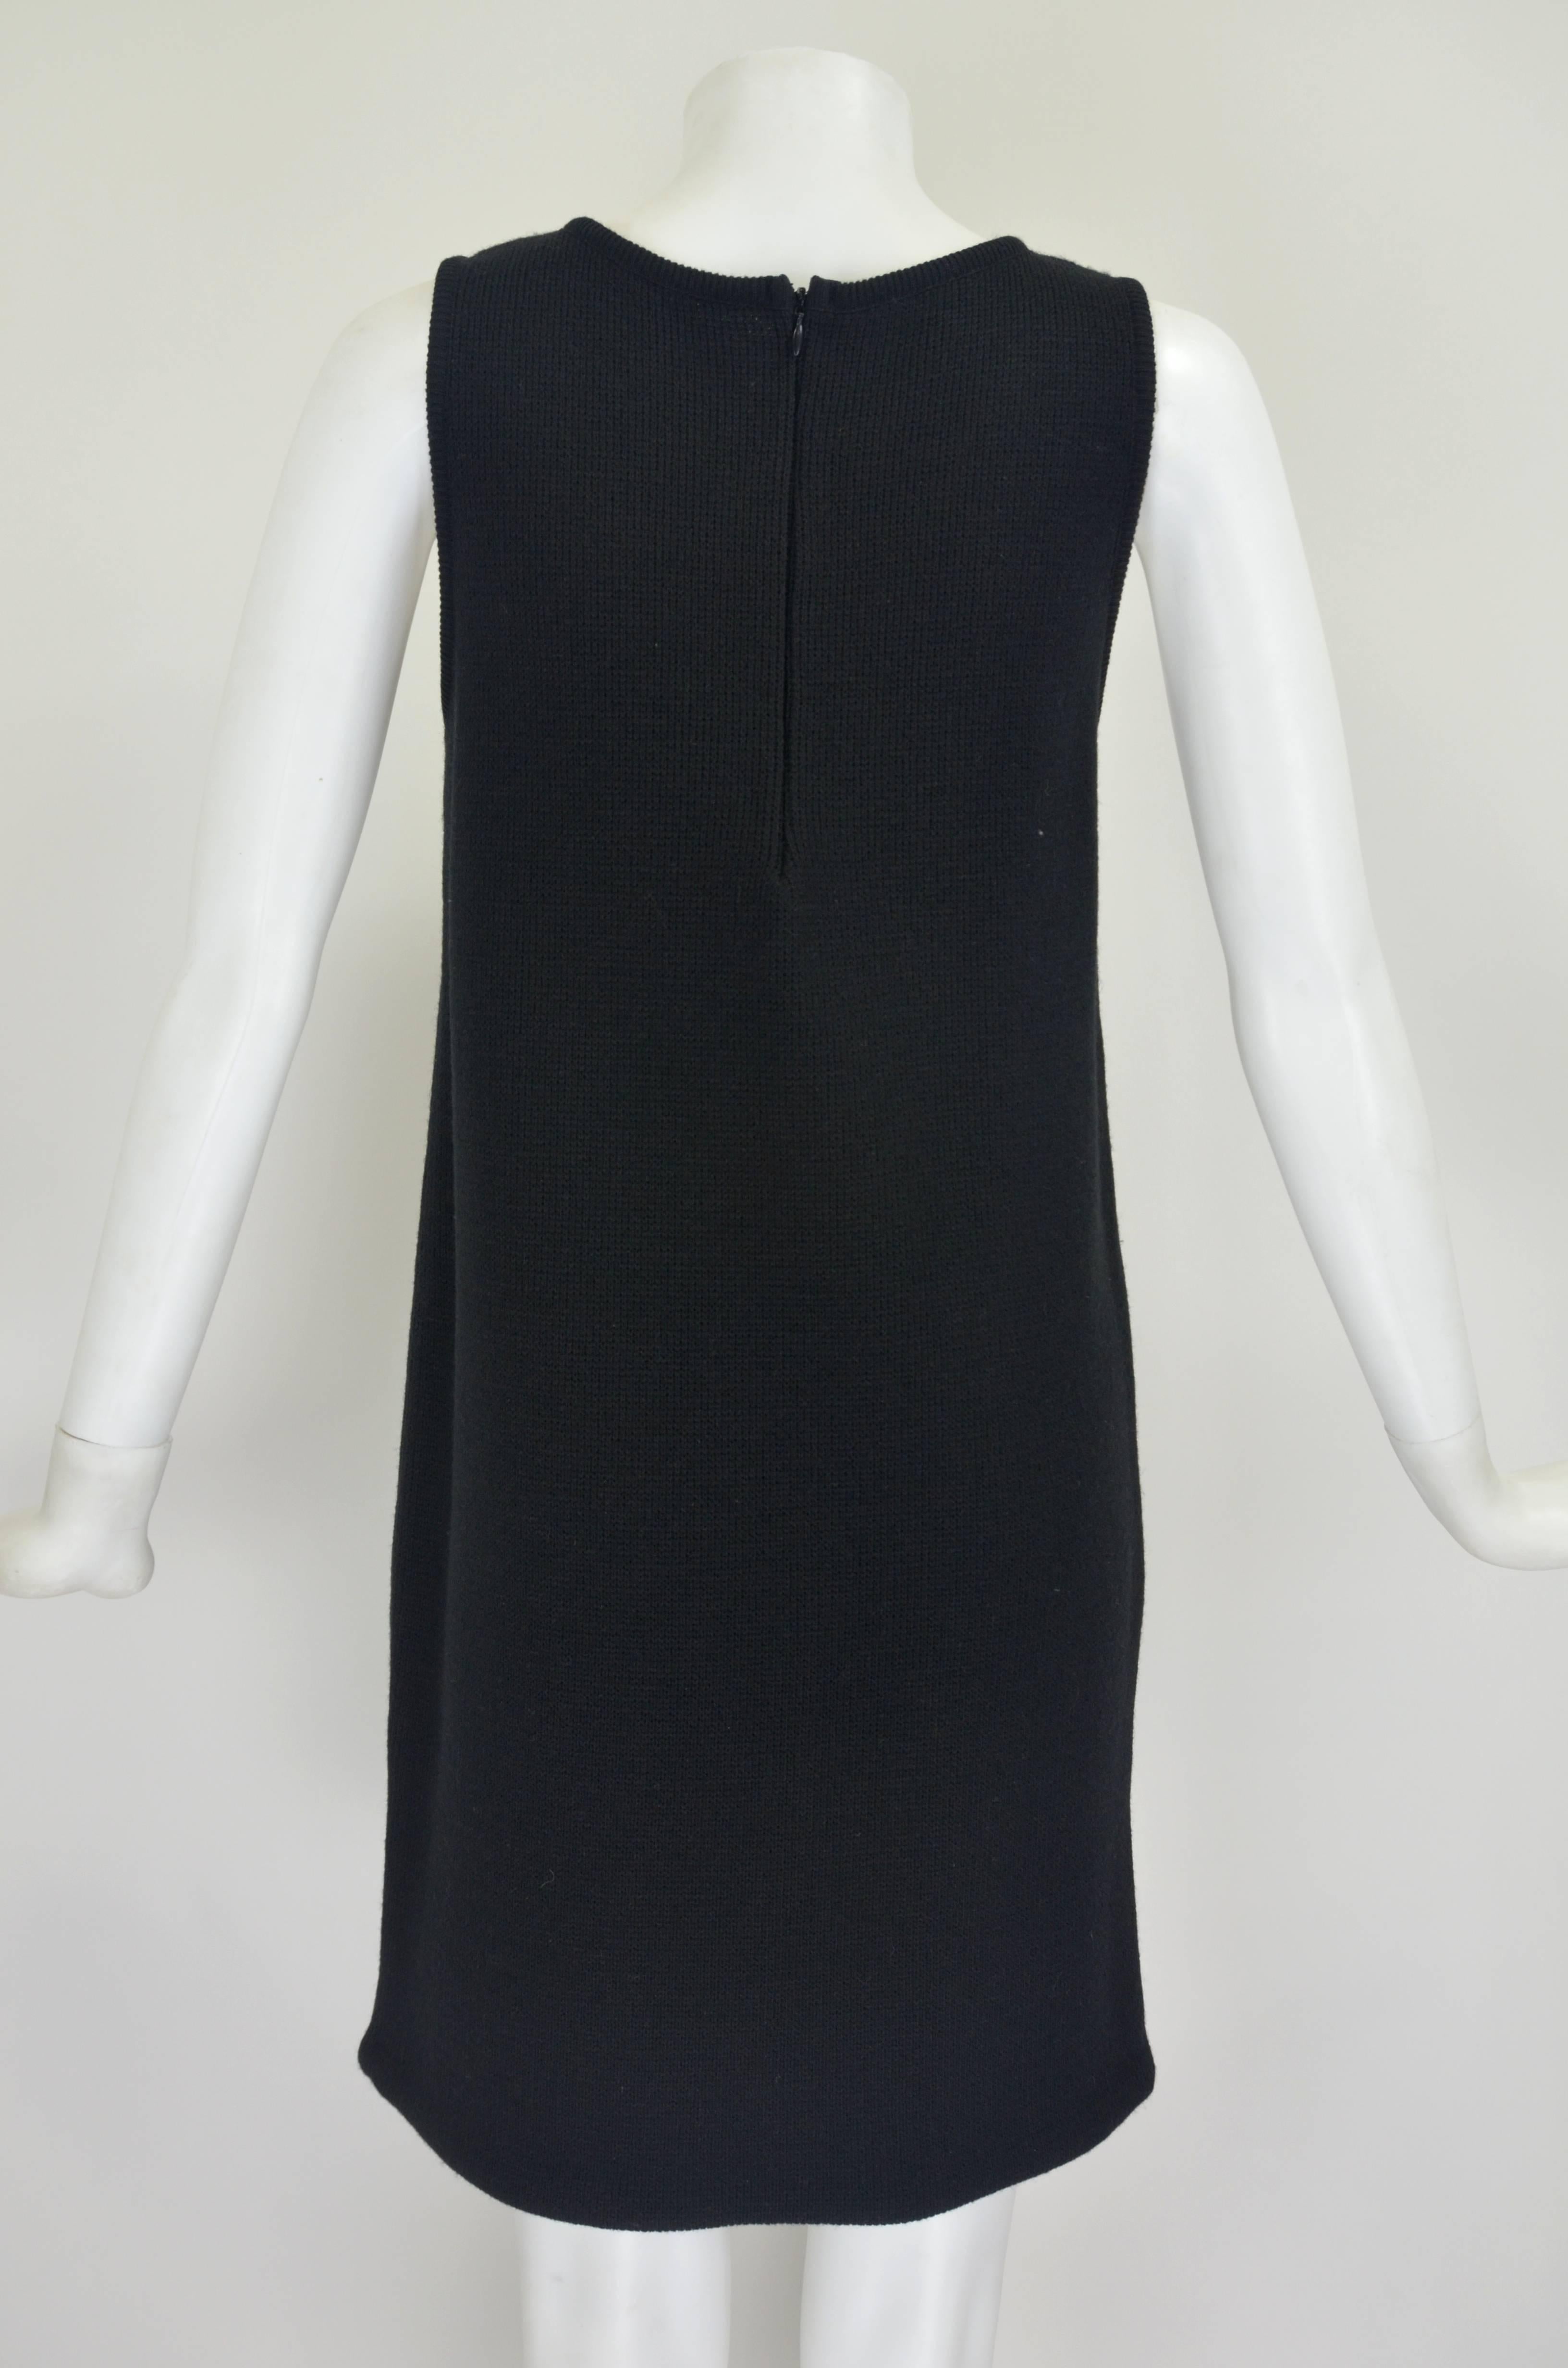 1990s Courreges Black Knit Wool Dress with Iconic Logo For Sale 3